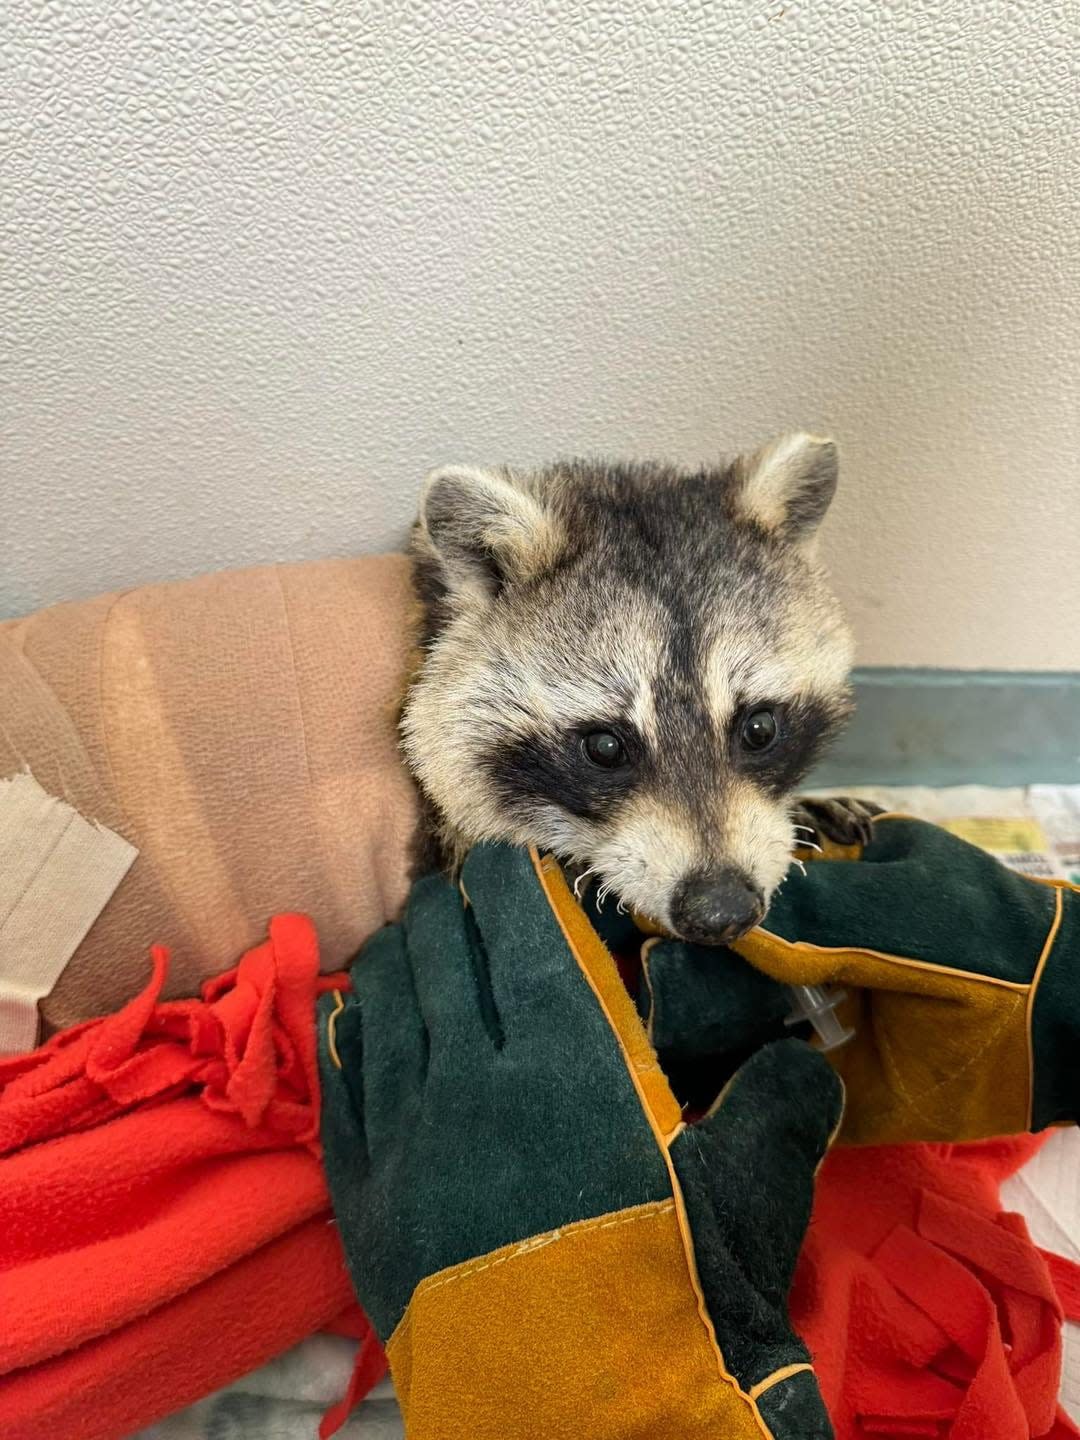 A Quincy man accused of setting fire to a live racoon has been indicted in Dedham Superior Court. The racoon died after two weeks of care at the New England Wildlife Center in Weymouth.